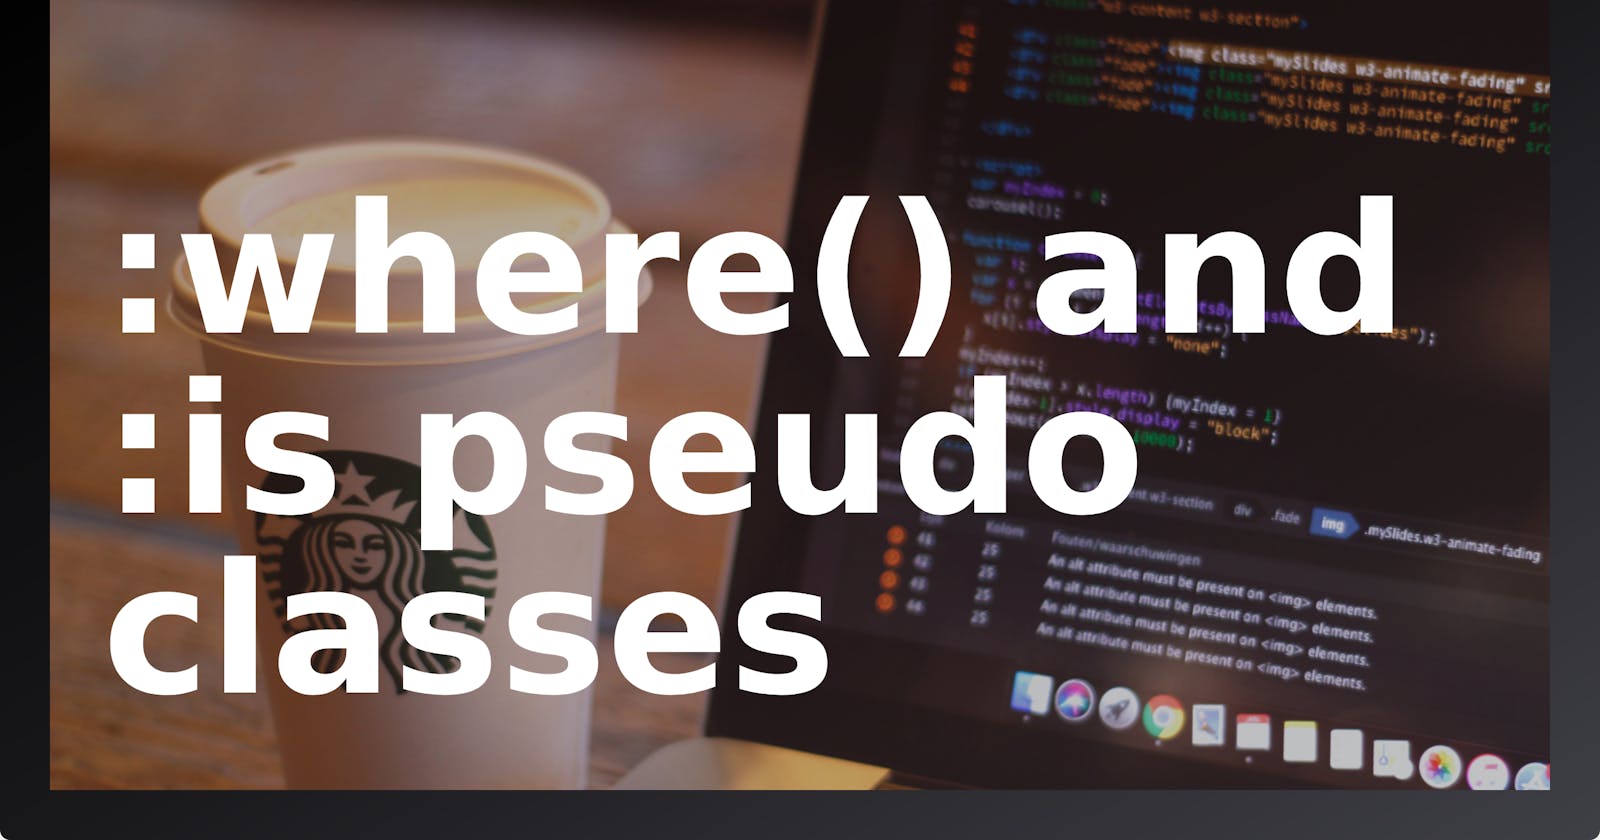 A new CSS :where() and :is pseudo classes